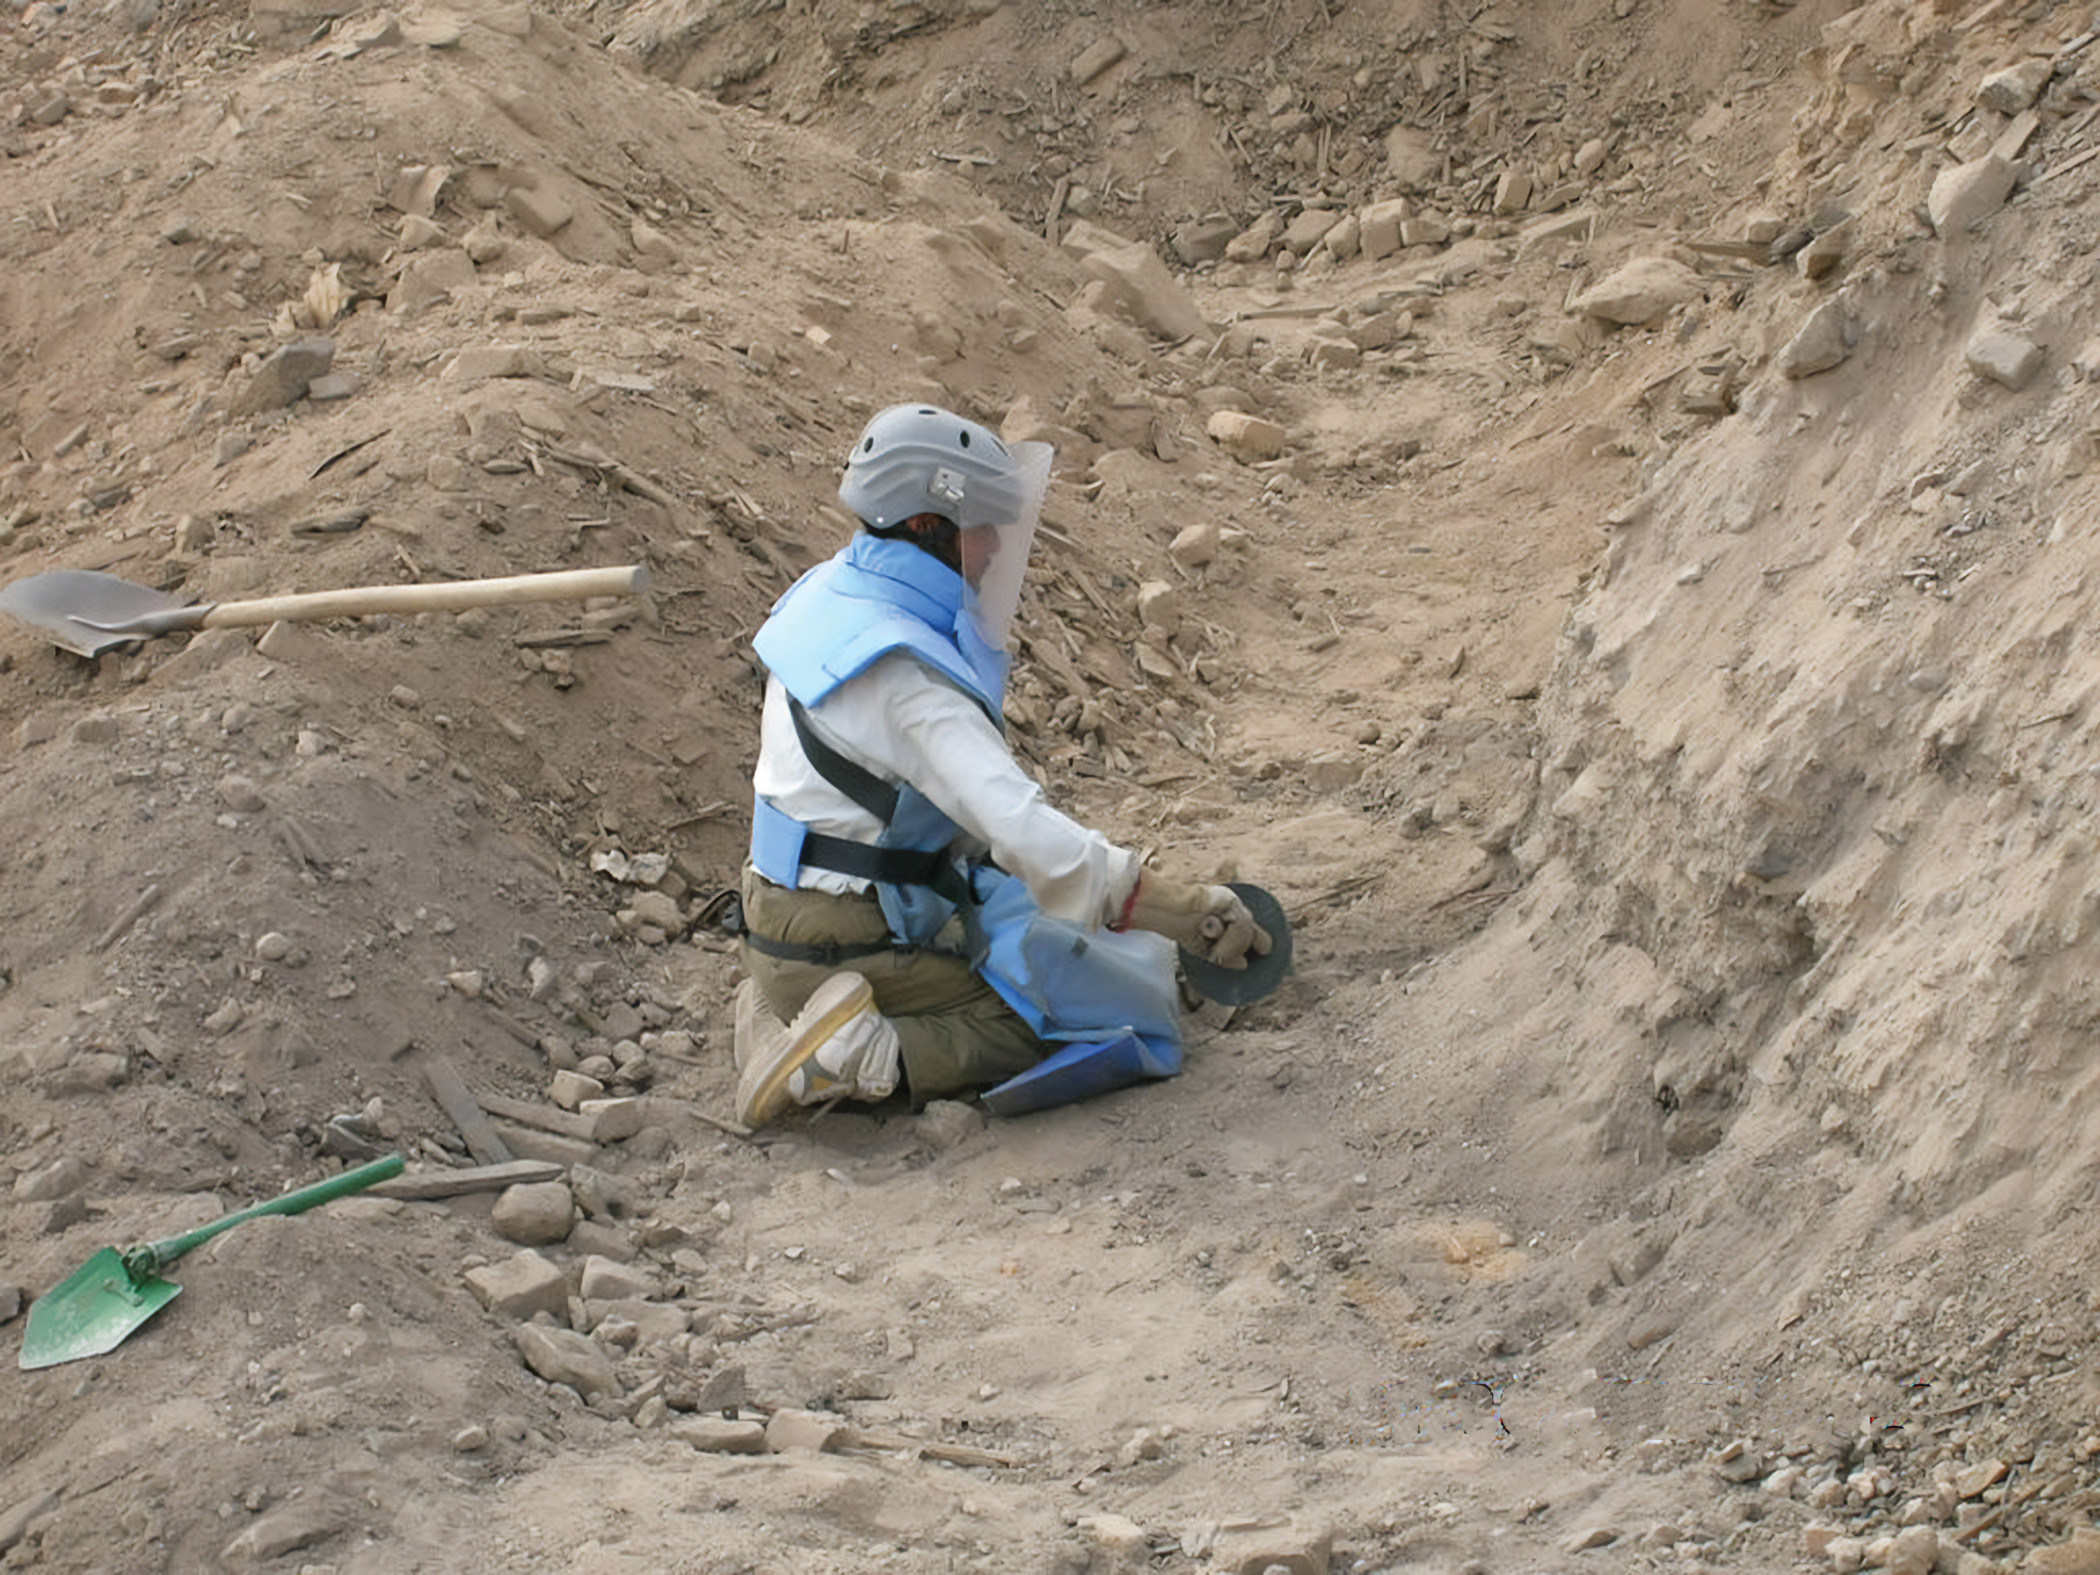 A person in protective gear kneeling in a large dirt pit